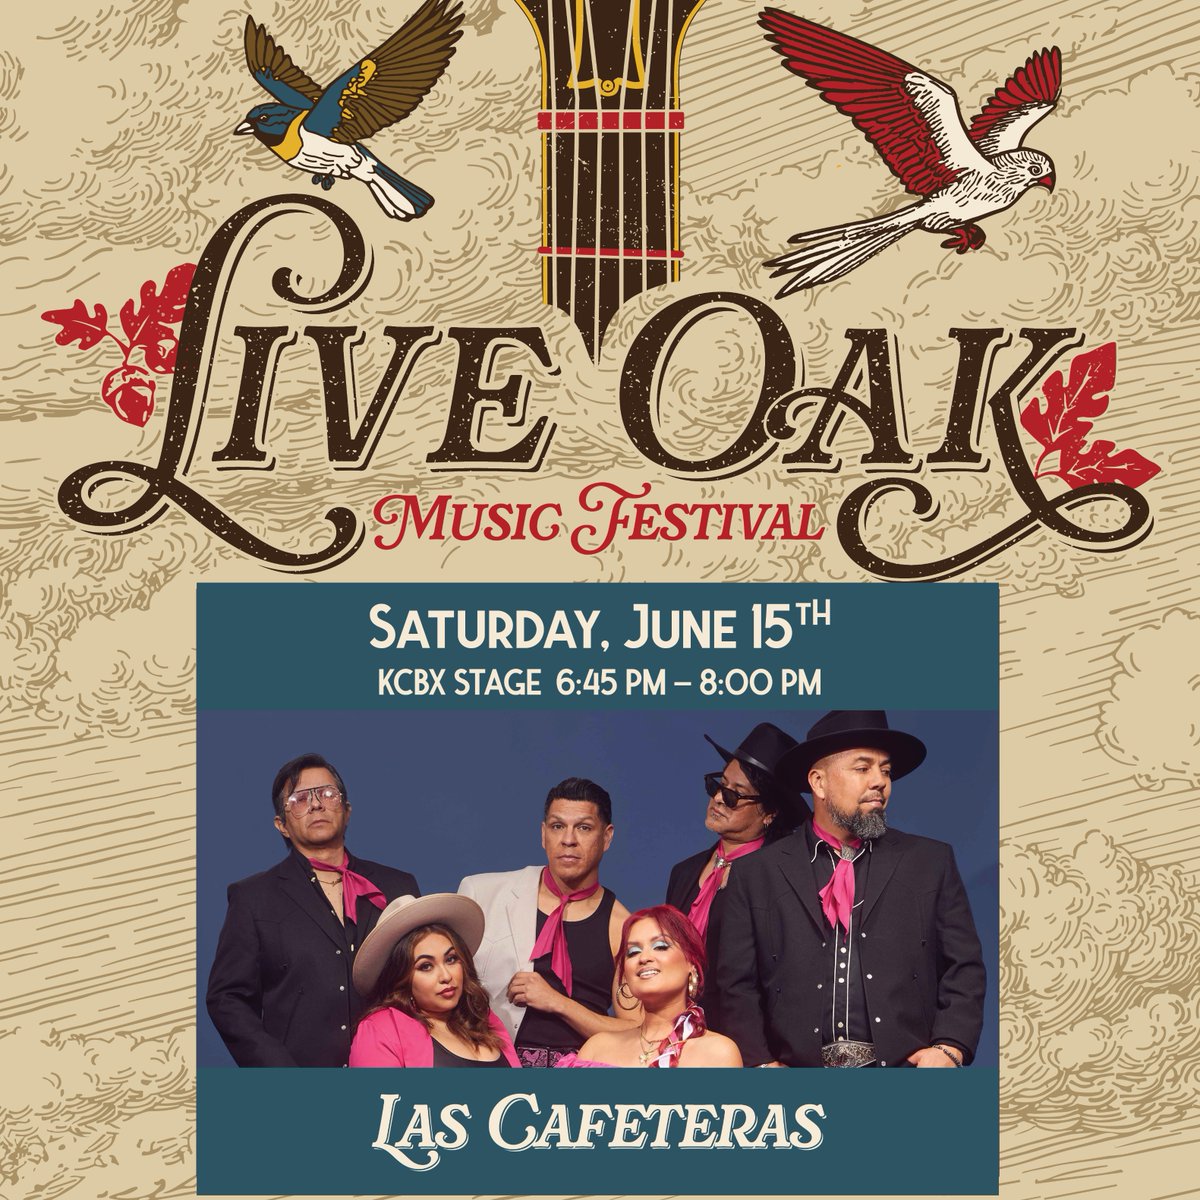 🎶 Day 3 of #BandWeek starts with the vibrant rhythms of @lascafeteras!  Experience their unique East LA sound at #LiveOakMusicFest. Don't miss this fusion of culture and music on June 15. 🌍 Learn more: liveoakfest.org/intertainment #KCBX